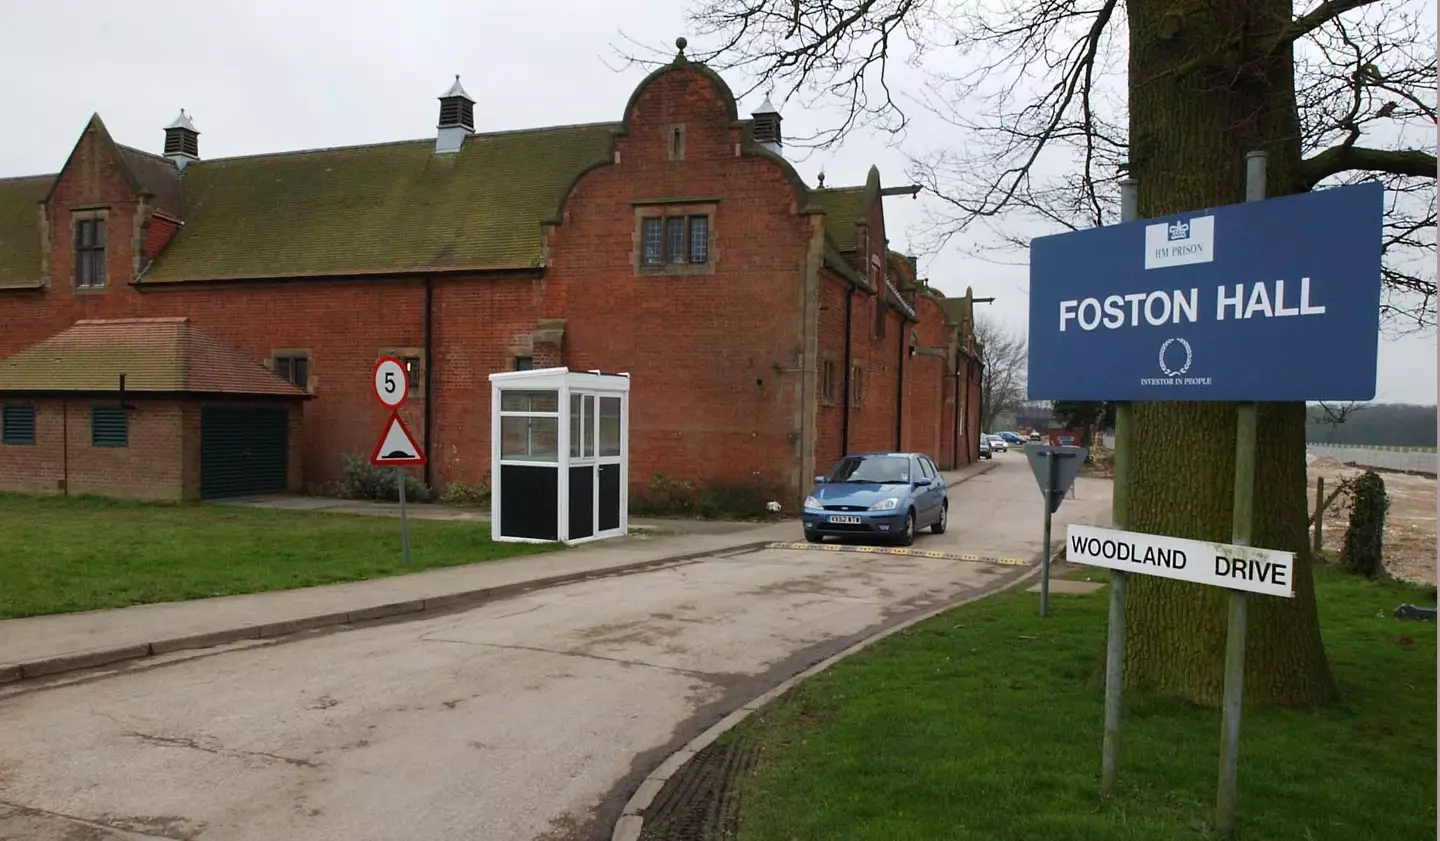 Phythian is being held at Foston Hall prison.